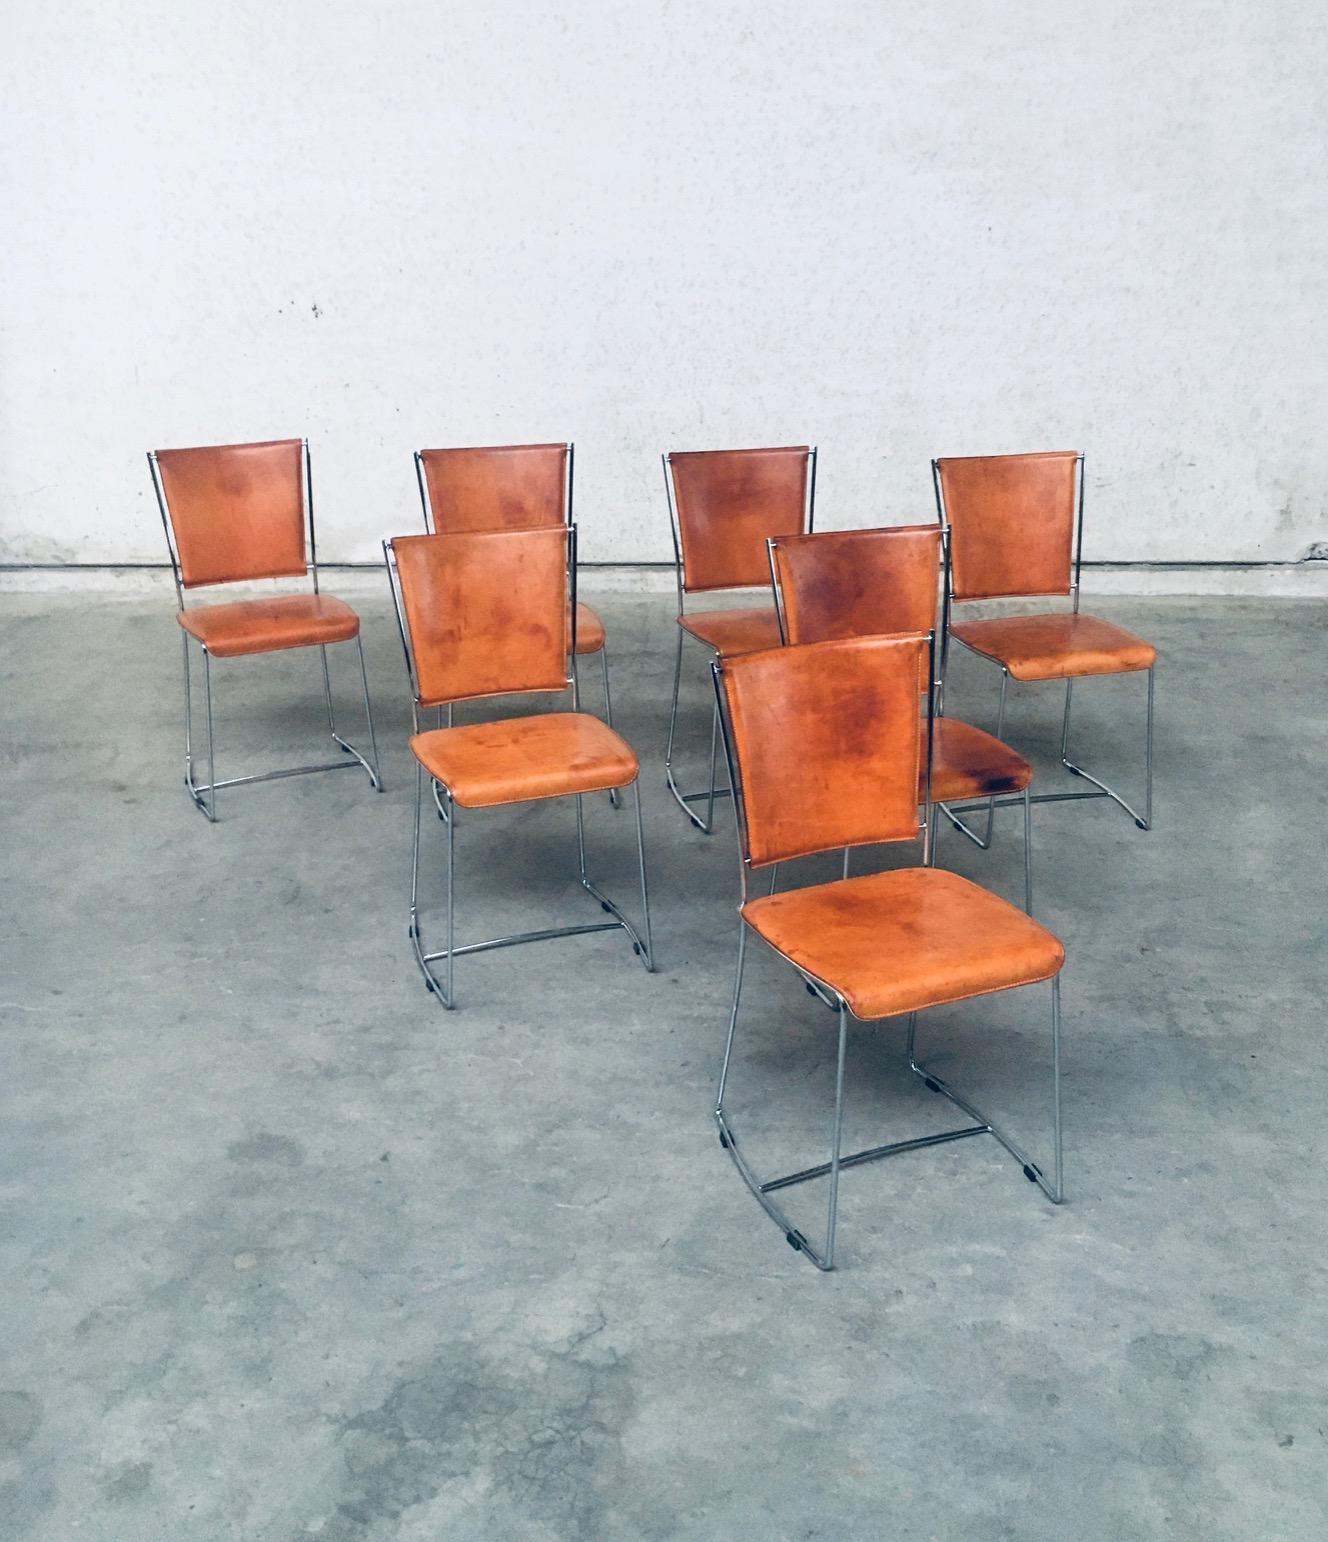 Vintage Postmodern Italian design natural leather dining chair set of 7 chairs by Segis, made in Italy in the early 1990's. Thick natural leather on chrome metal frame. Well patinated natural leather from it's age and use. Beautiful in their form